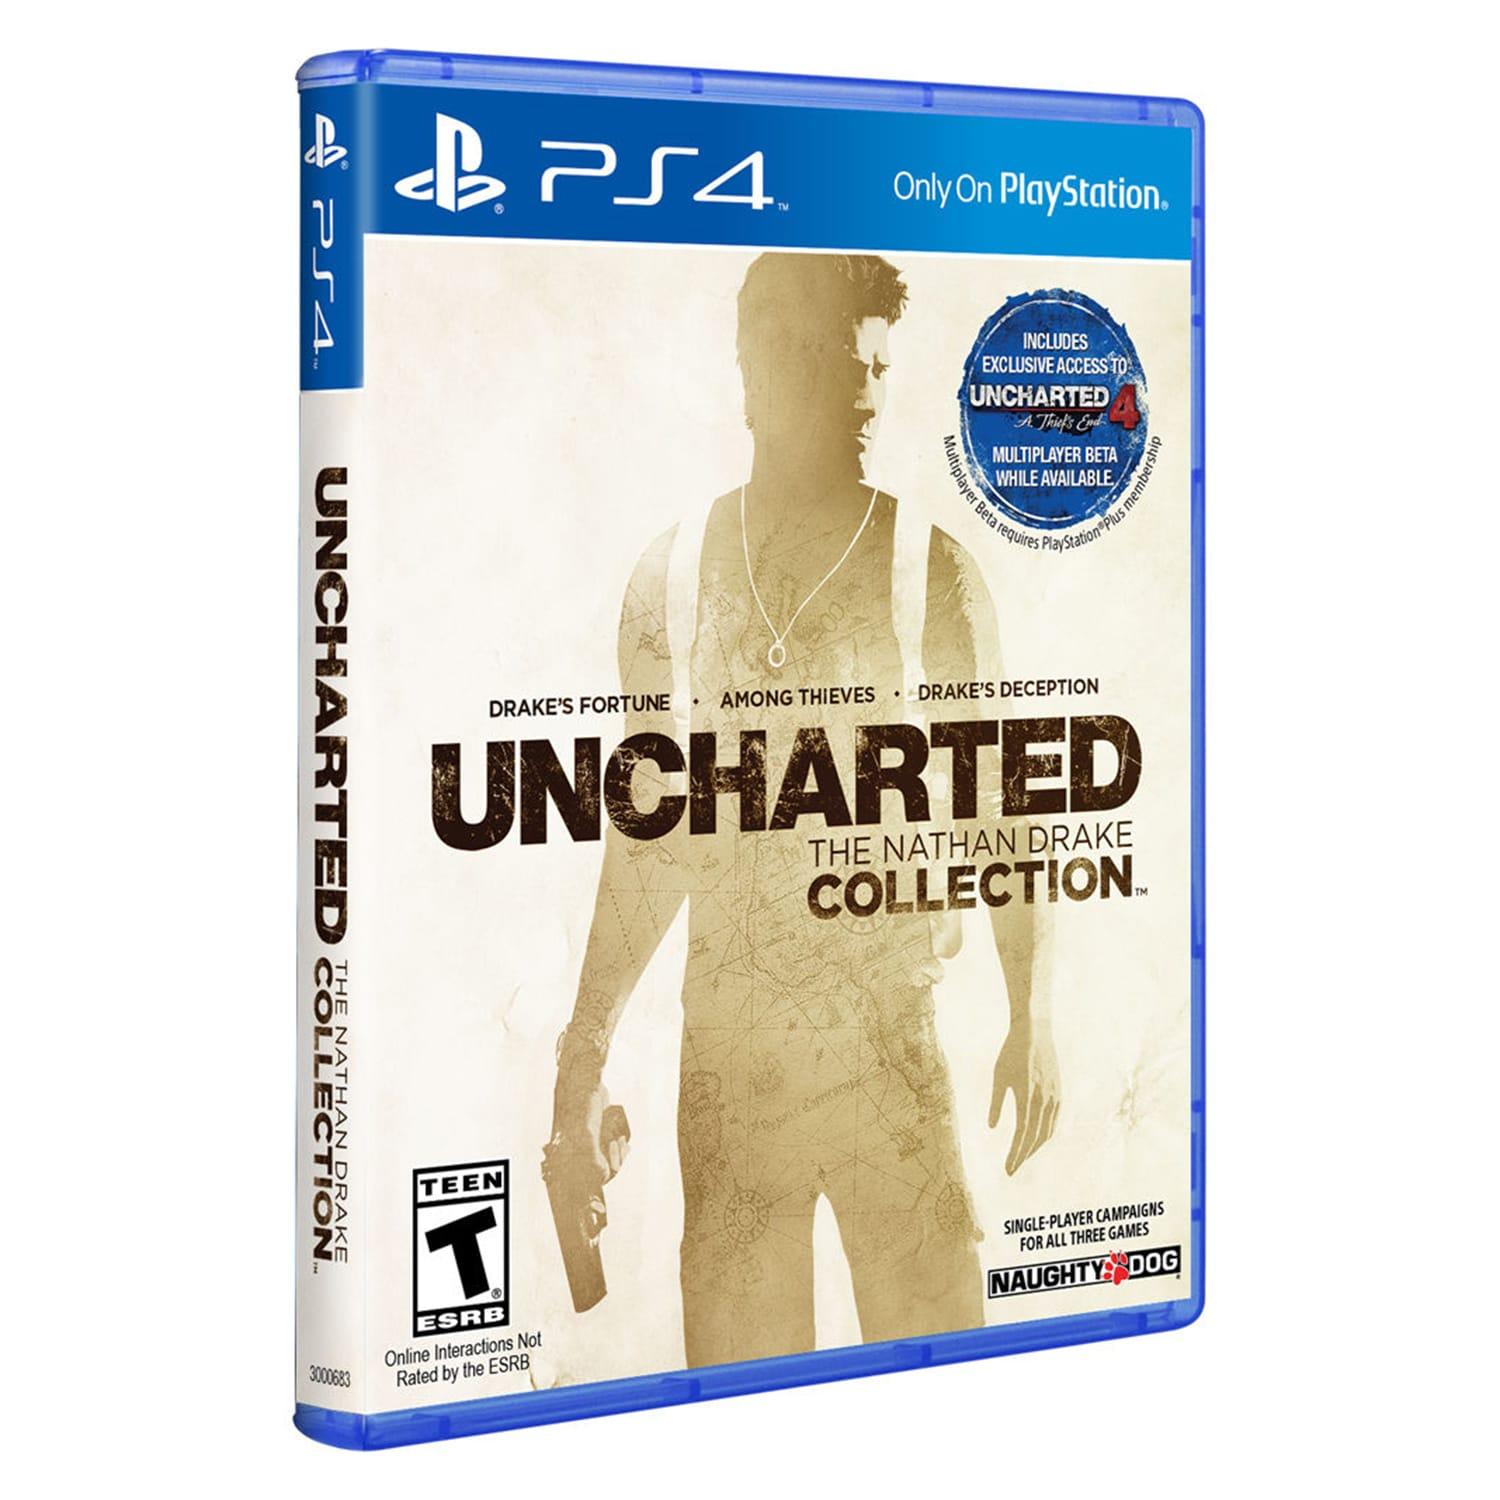 Uncharted collection купить. Uncharted collection ps4. Анчартед коллекция ps4.